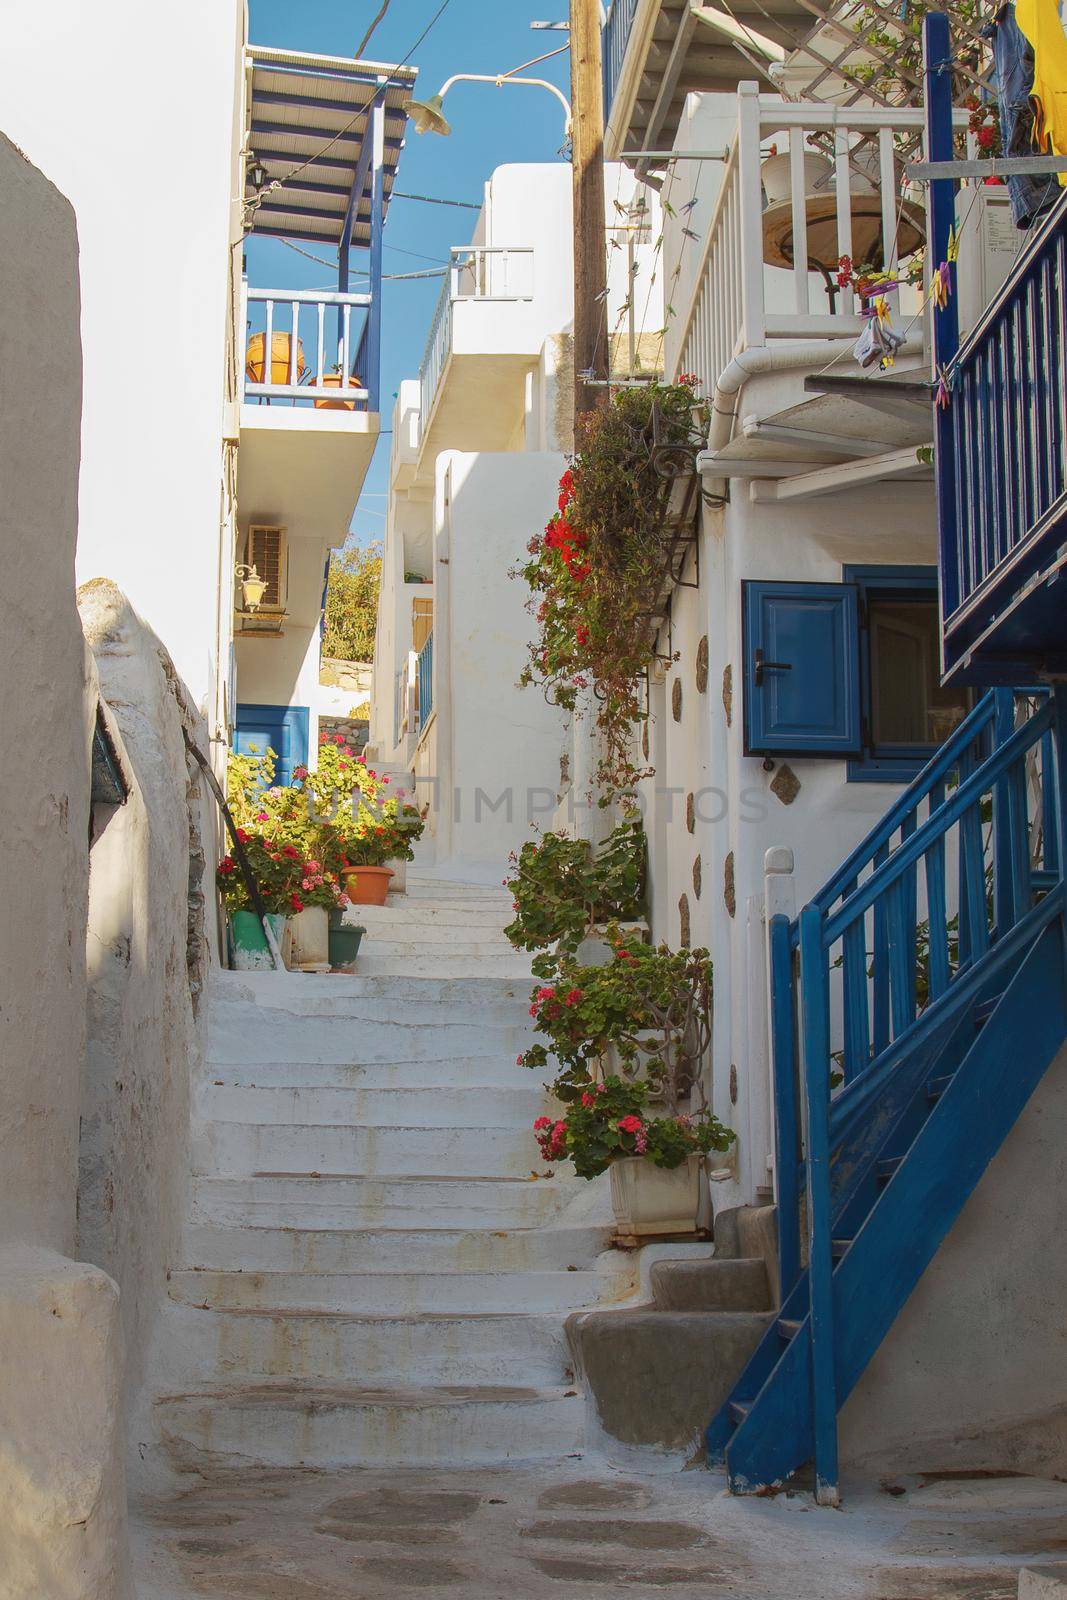 Typical Colors and Street in Mykonos Greece by wondry